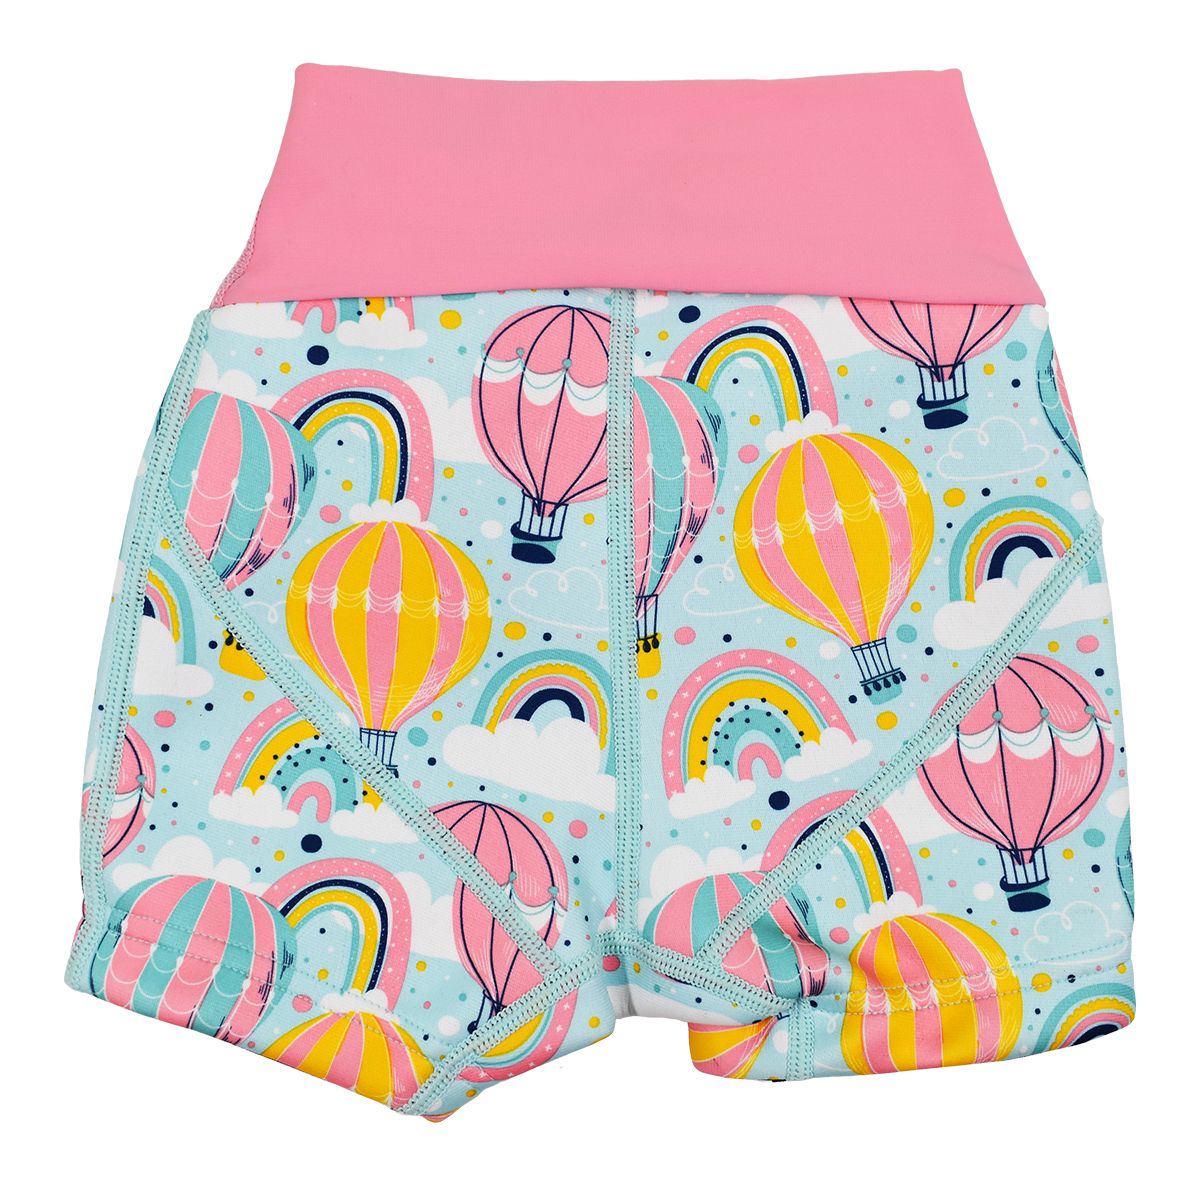 Neoprene swim shorts in baby blue with pink waist and hot air balloons themed print, including clouds and rainbows. Back.